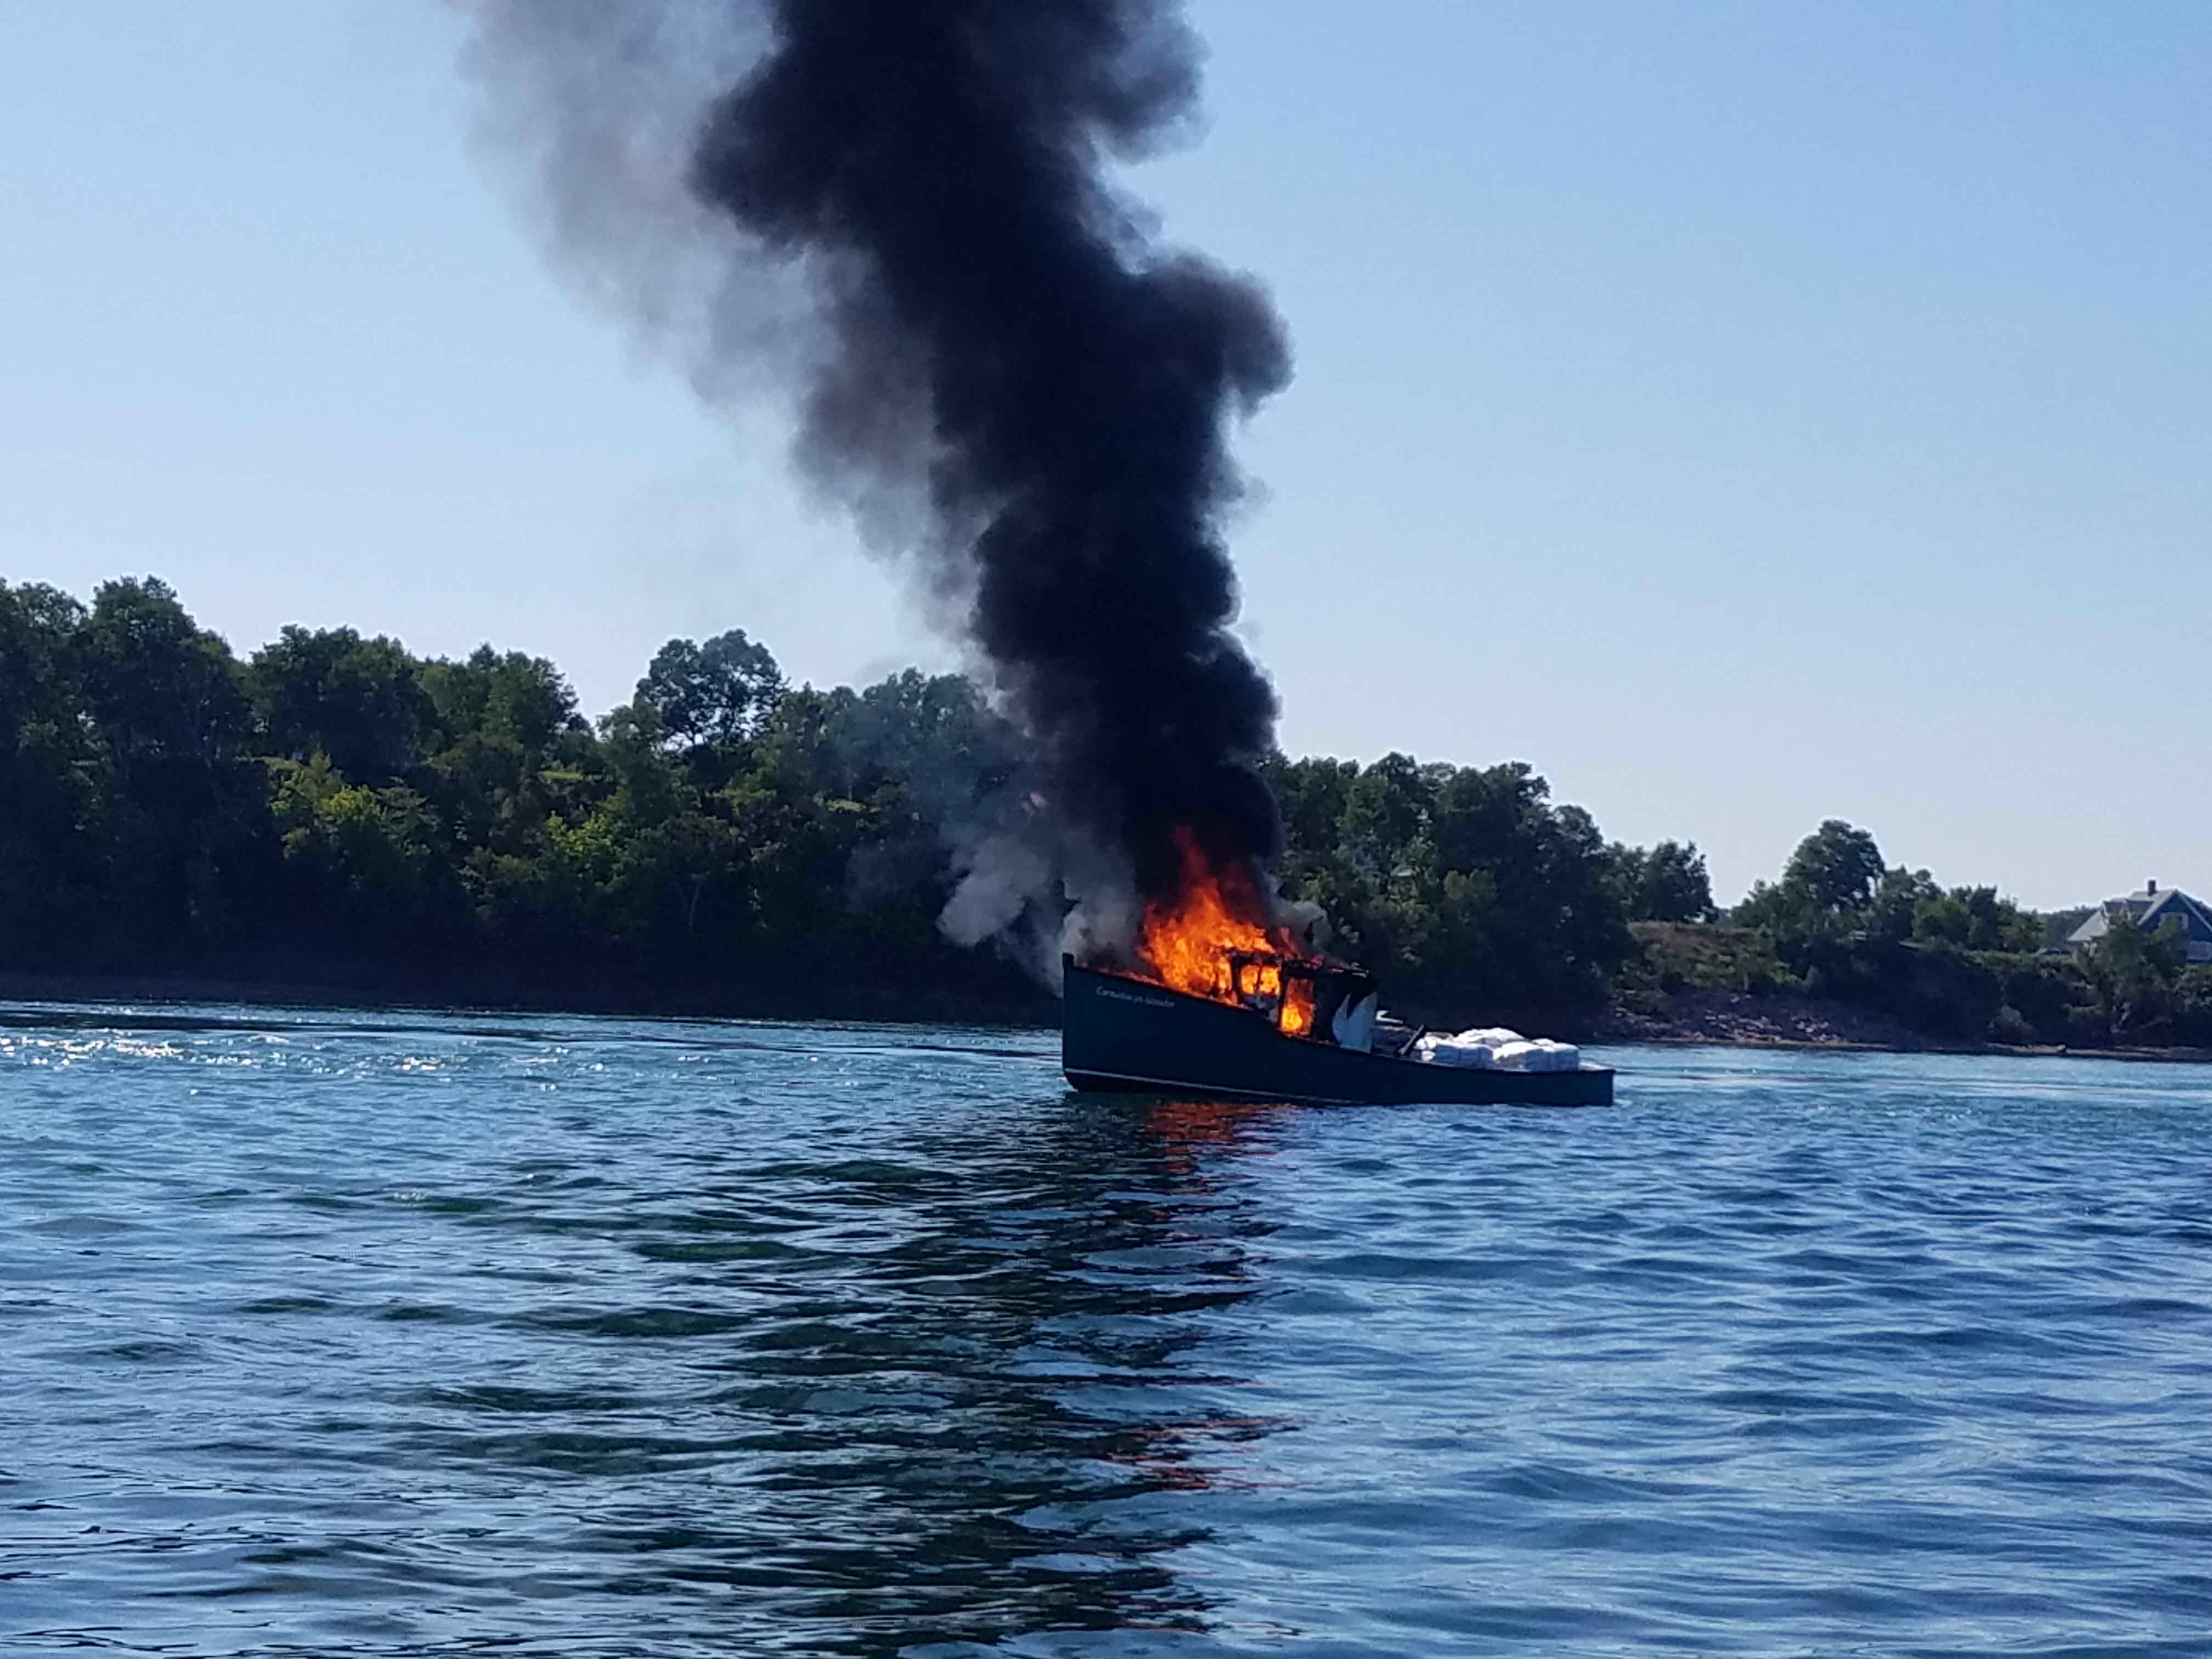 Cooke Aquaculture Employees Rescued in Passamaquoddy Bay After Boat Catches Fire